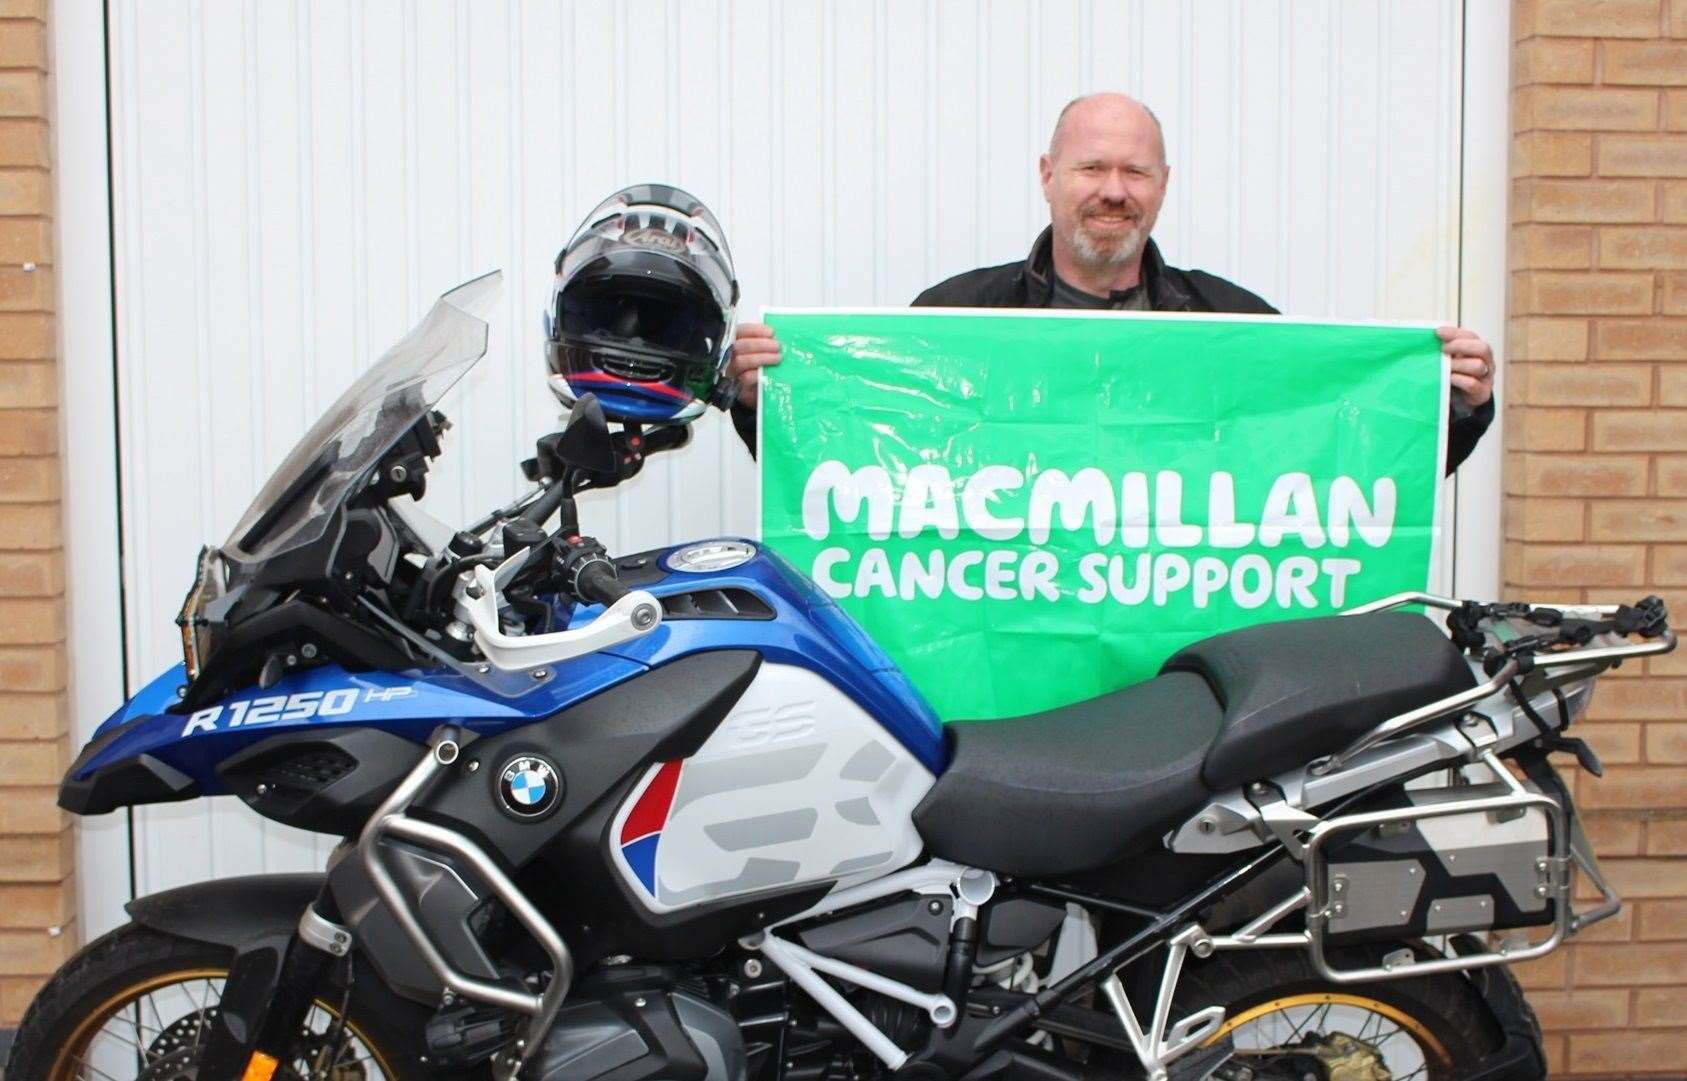 Damian has raised over £2800 so far for Macmillian Cancer Support